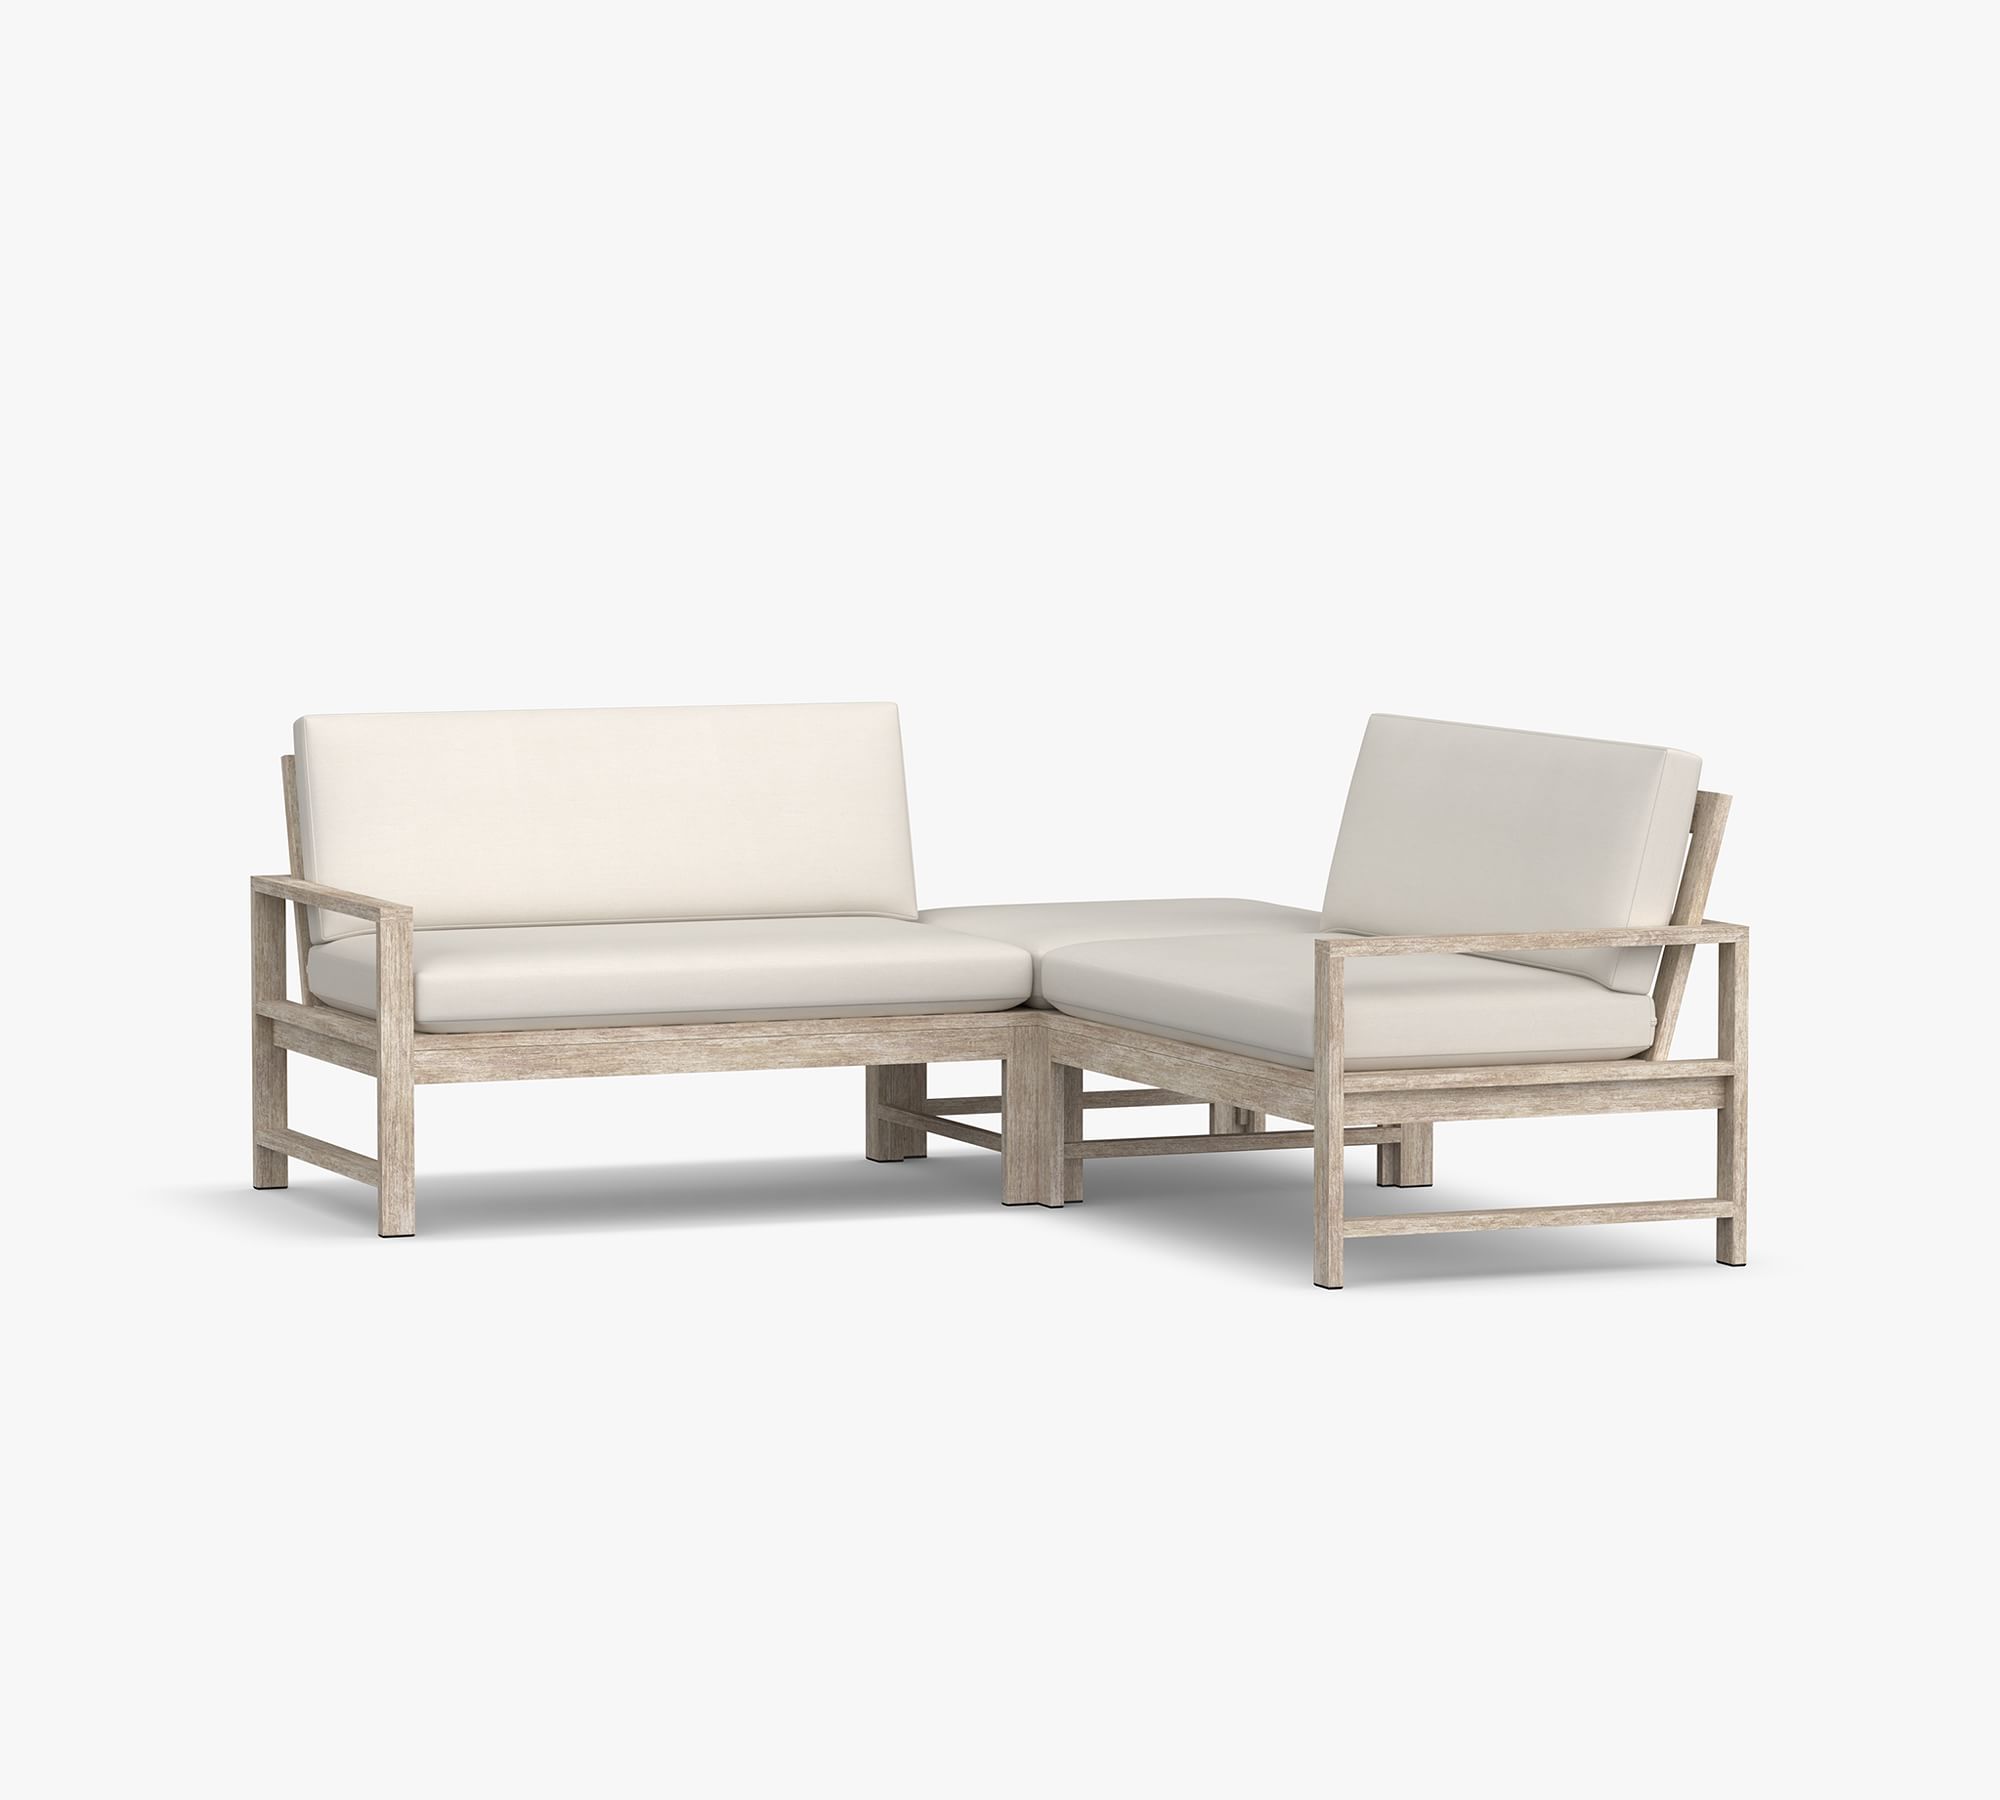 Indio Eucalyptus 3-Piece L-Shaped Outdoor Sectional (78")